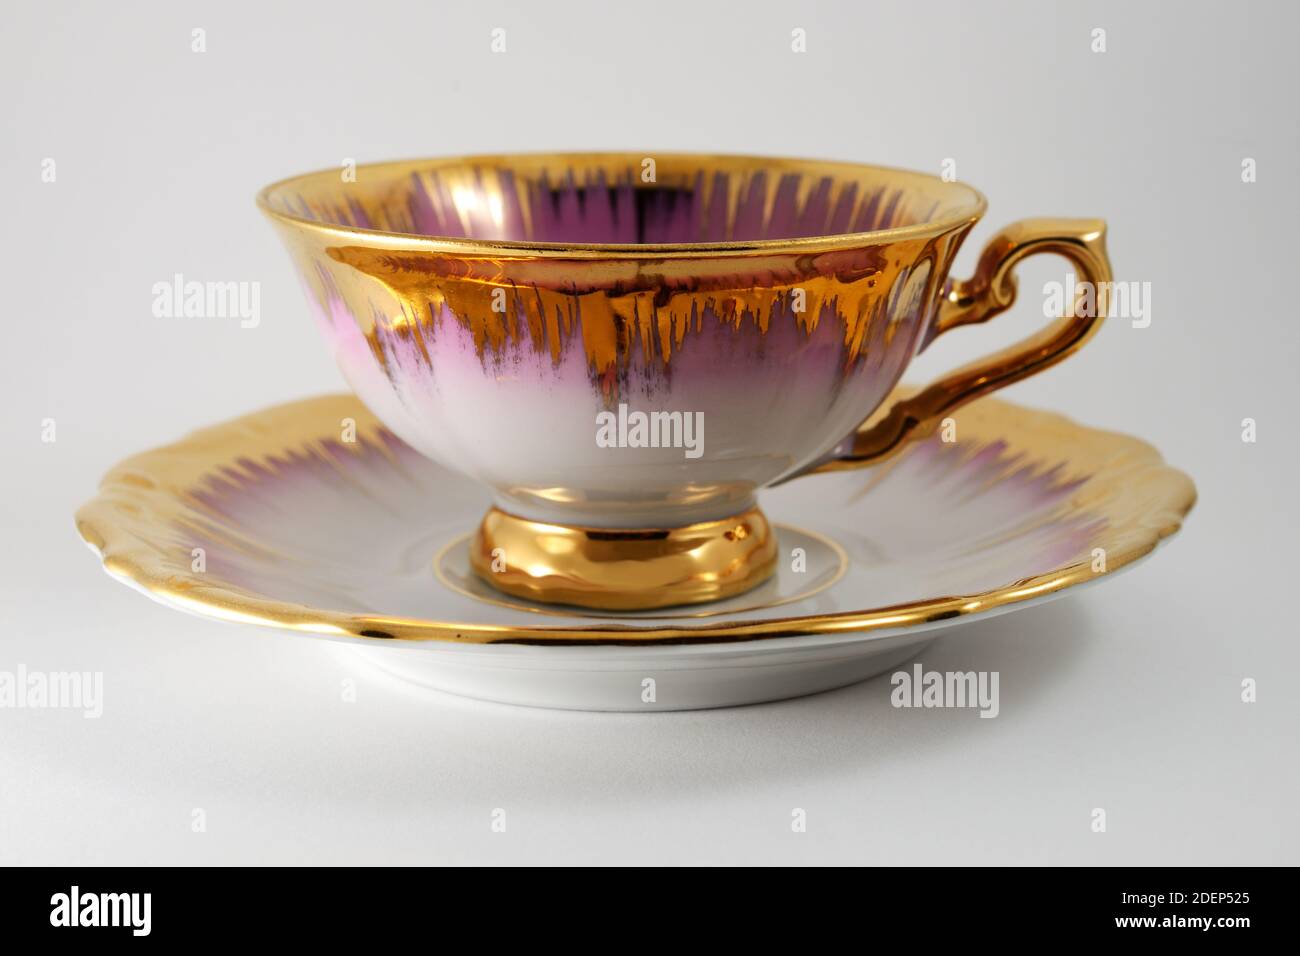 empty porcelain tea cup with gilding on a white background Stock Photo